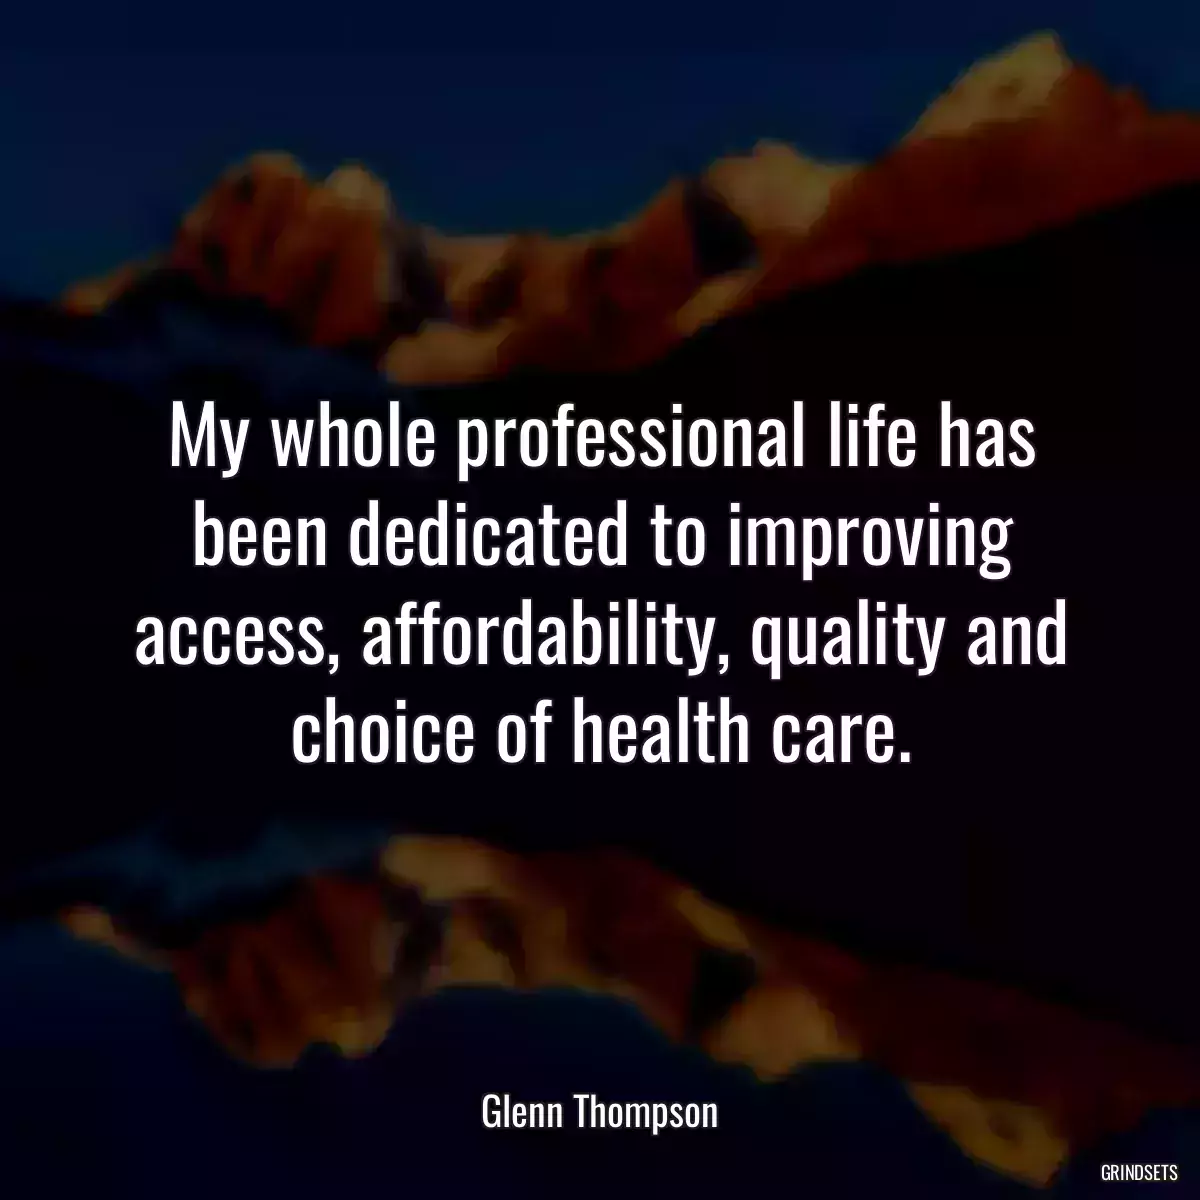 My whole professional life has been dedicated to improving access, affordability, quality and choice of health care.